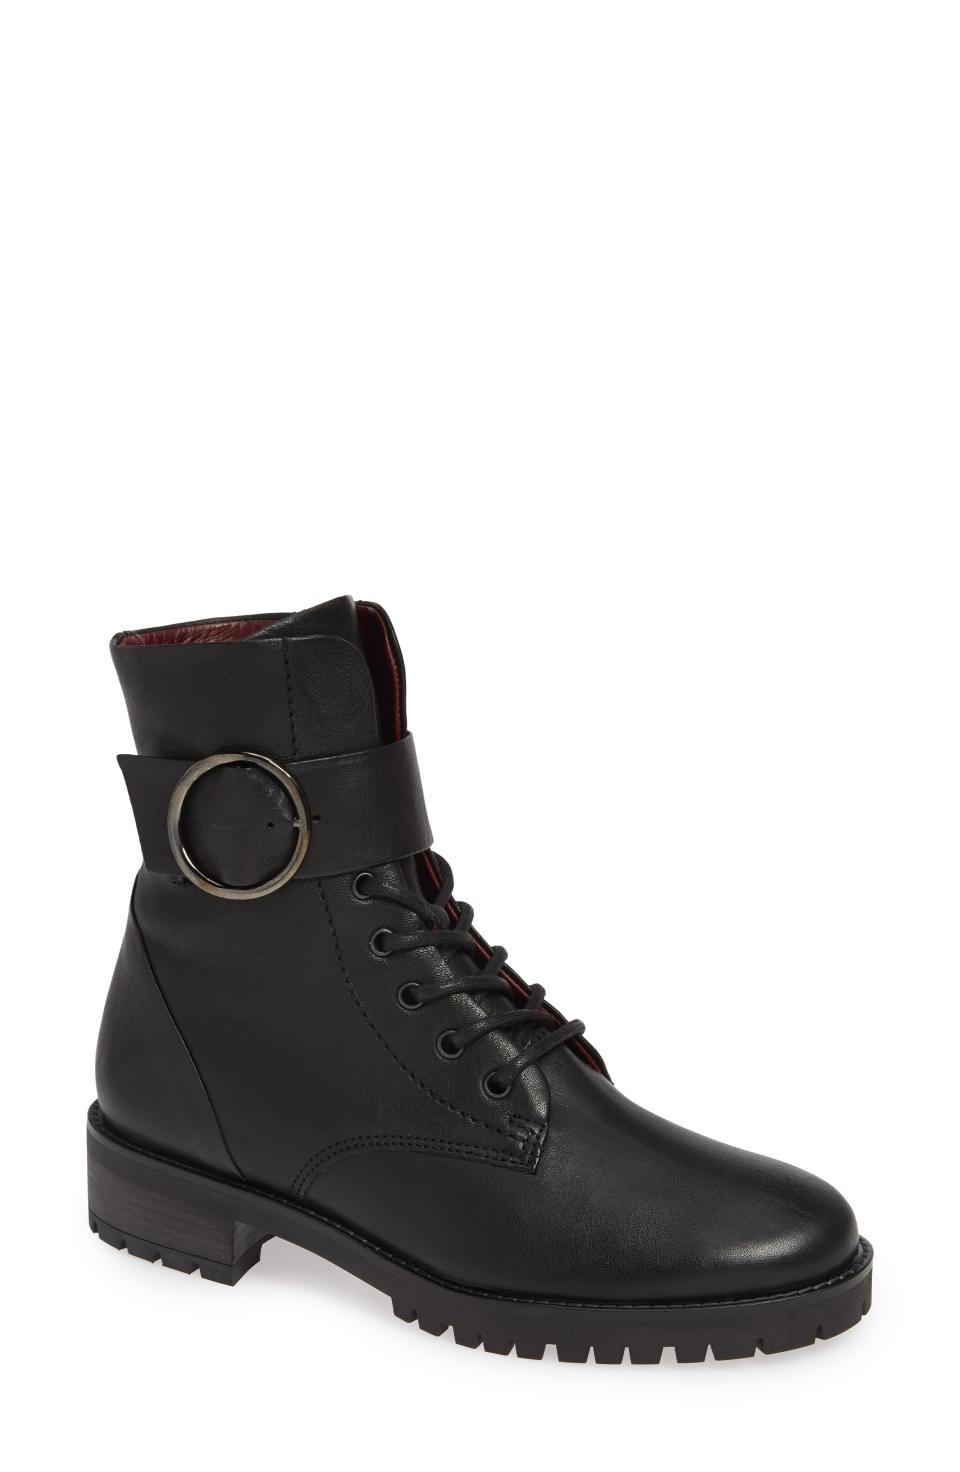 2) An Edgy Pair of Combat Boots That Hold up in the Snow